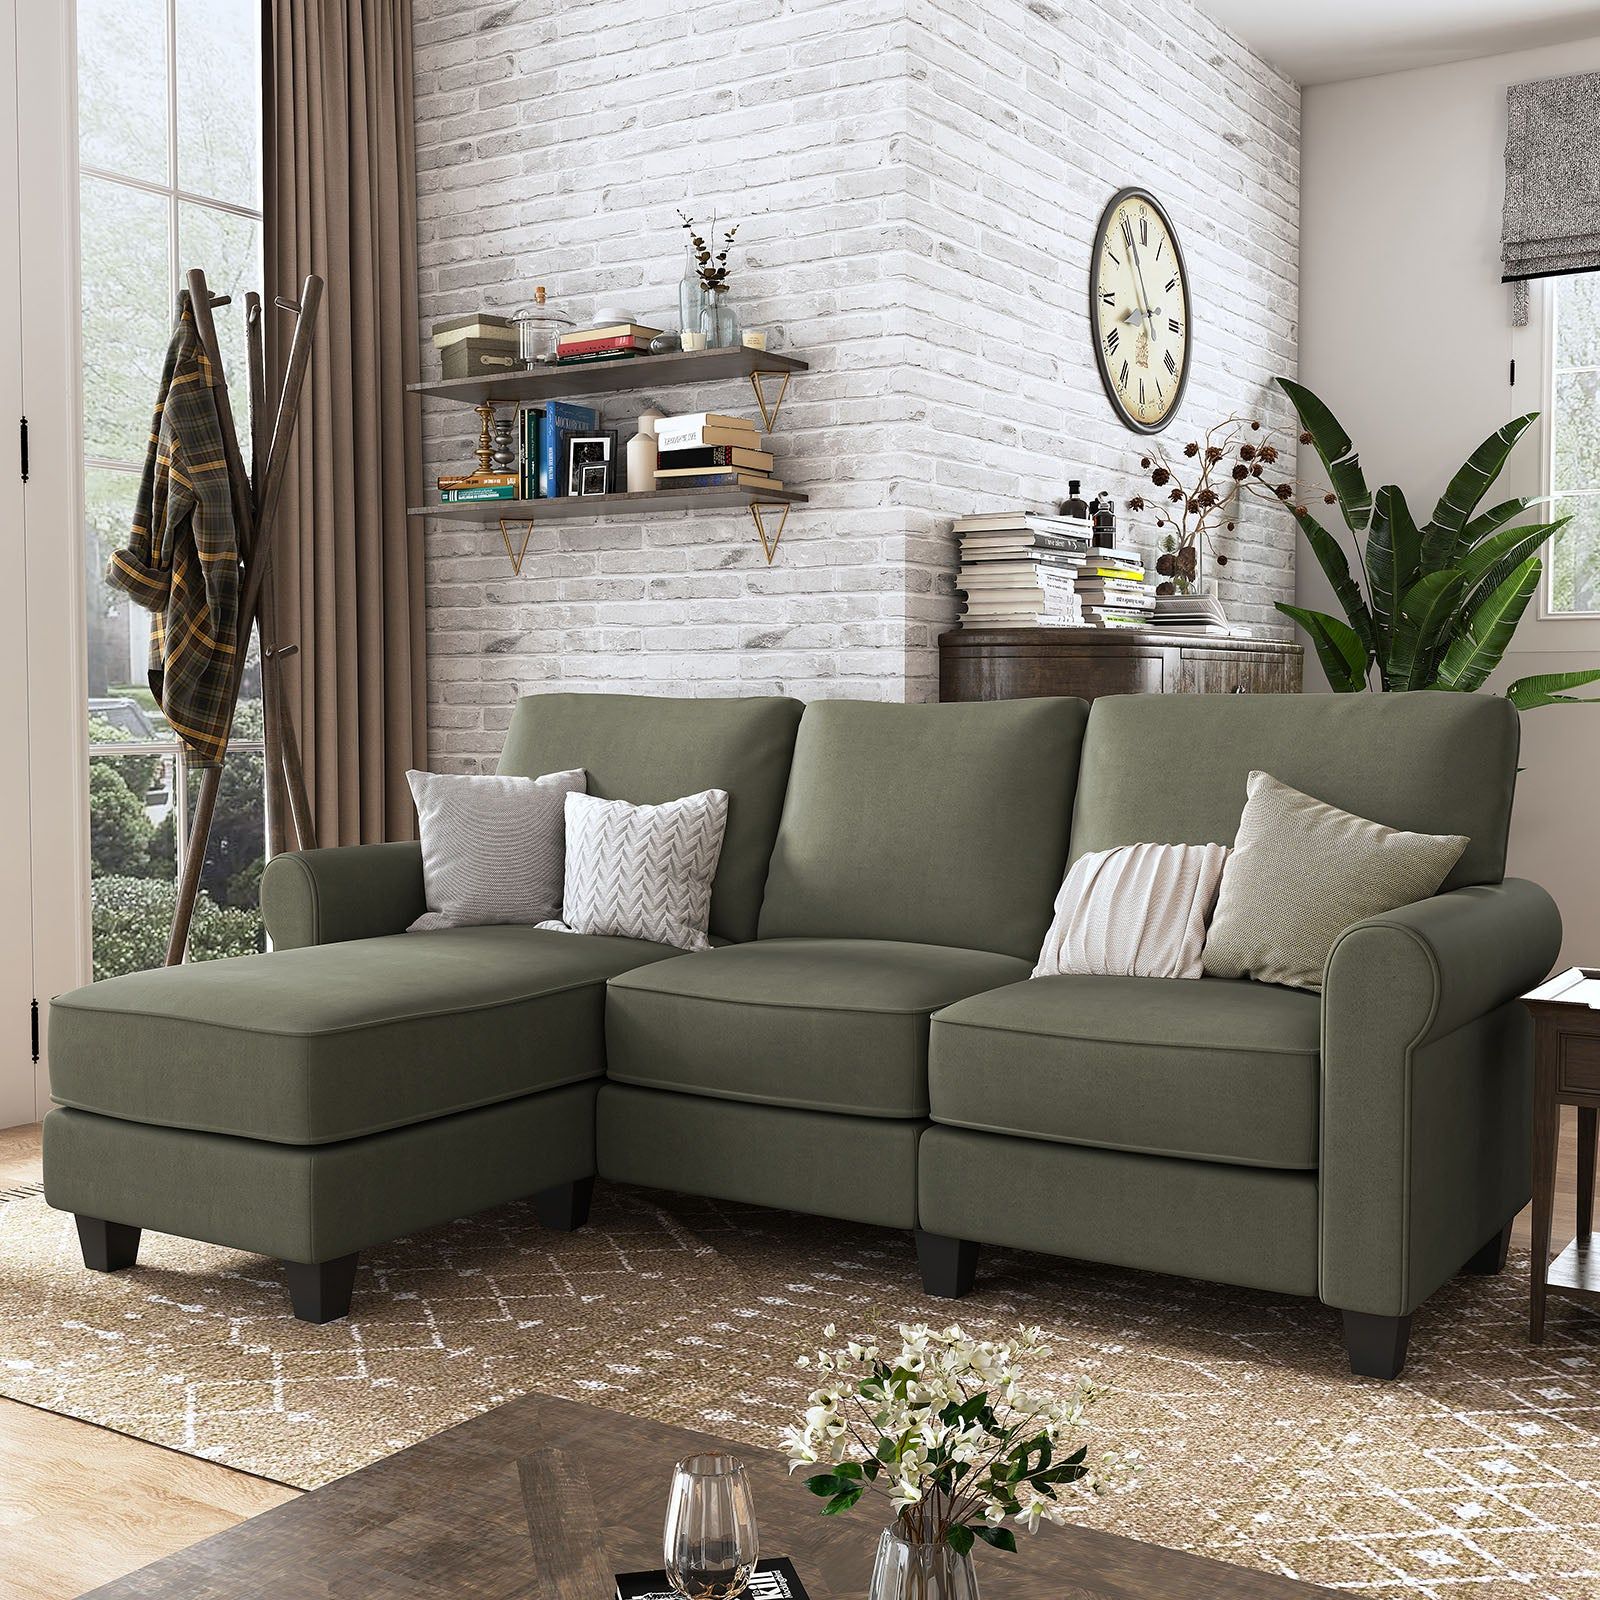 Nolany 3 Seat L Shaped Reversible Sectional Sofa Couch | Nolany In 3 Seat Convertible Sectional Sofas (Gallery 10 of 20)